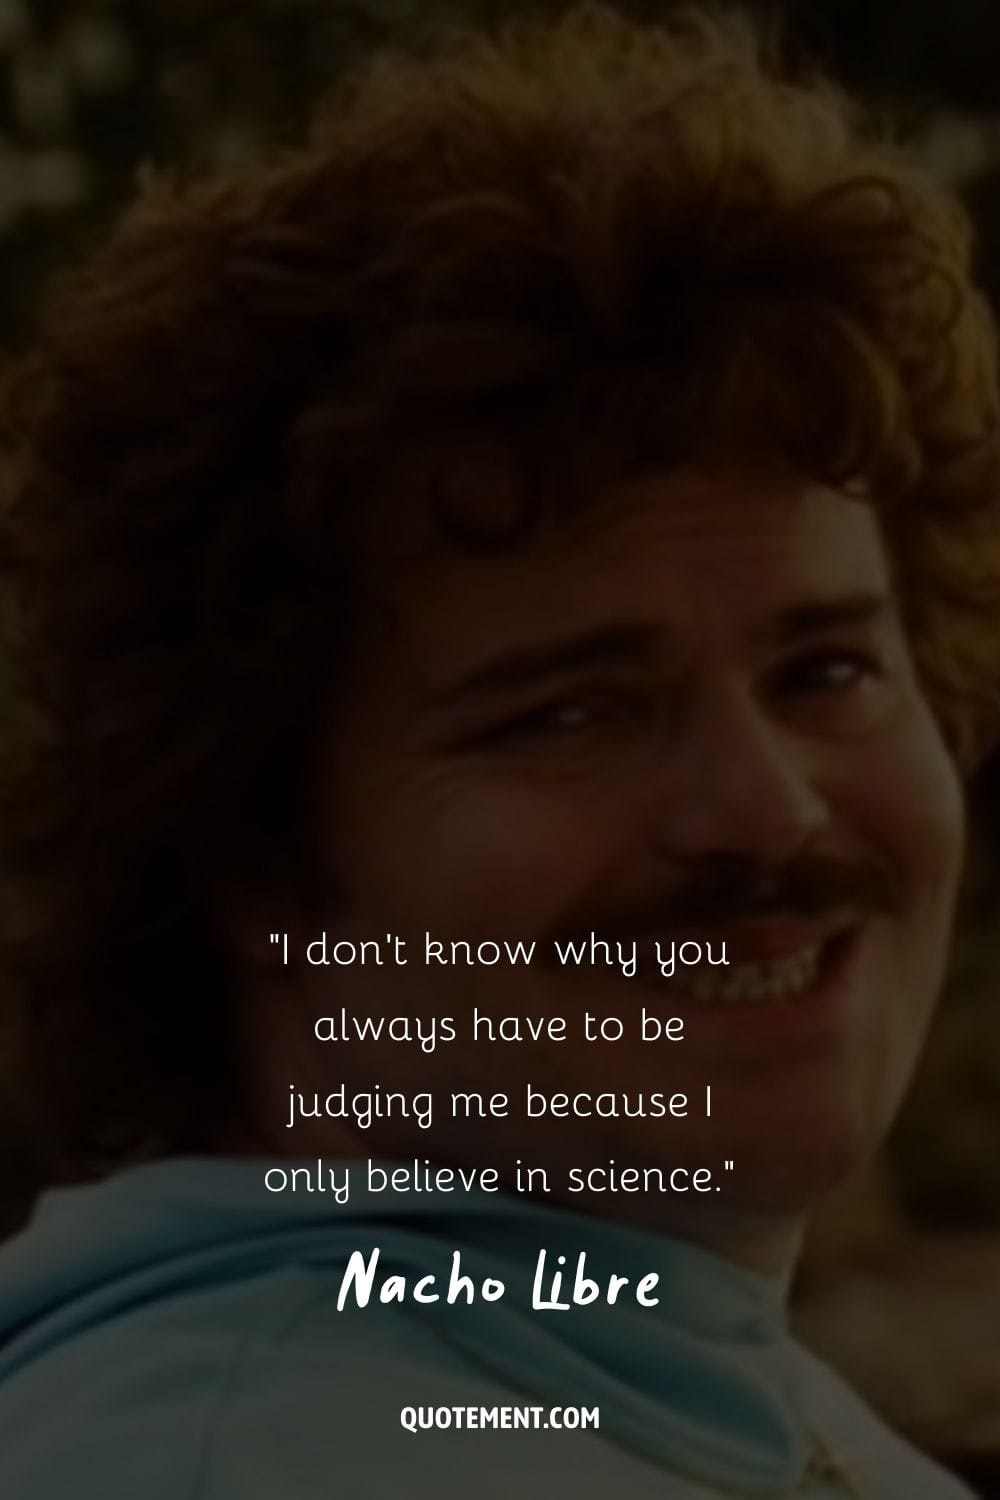 I don't know why you always have to be judging me because I only believe in science.